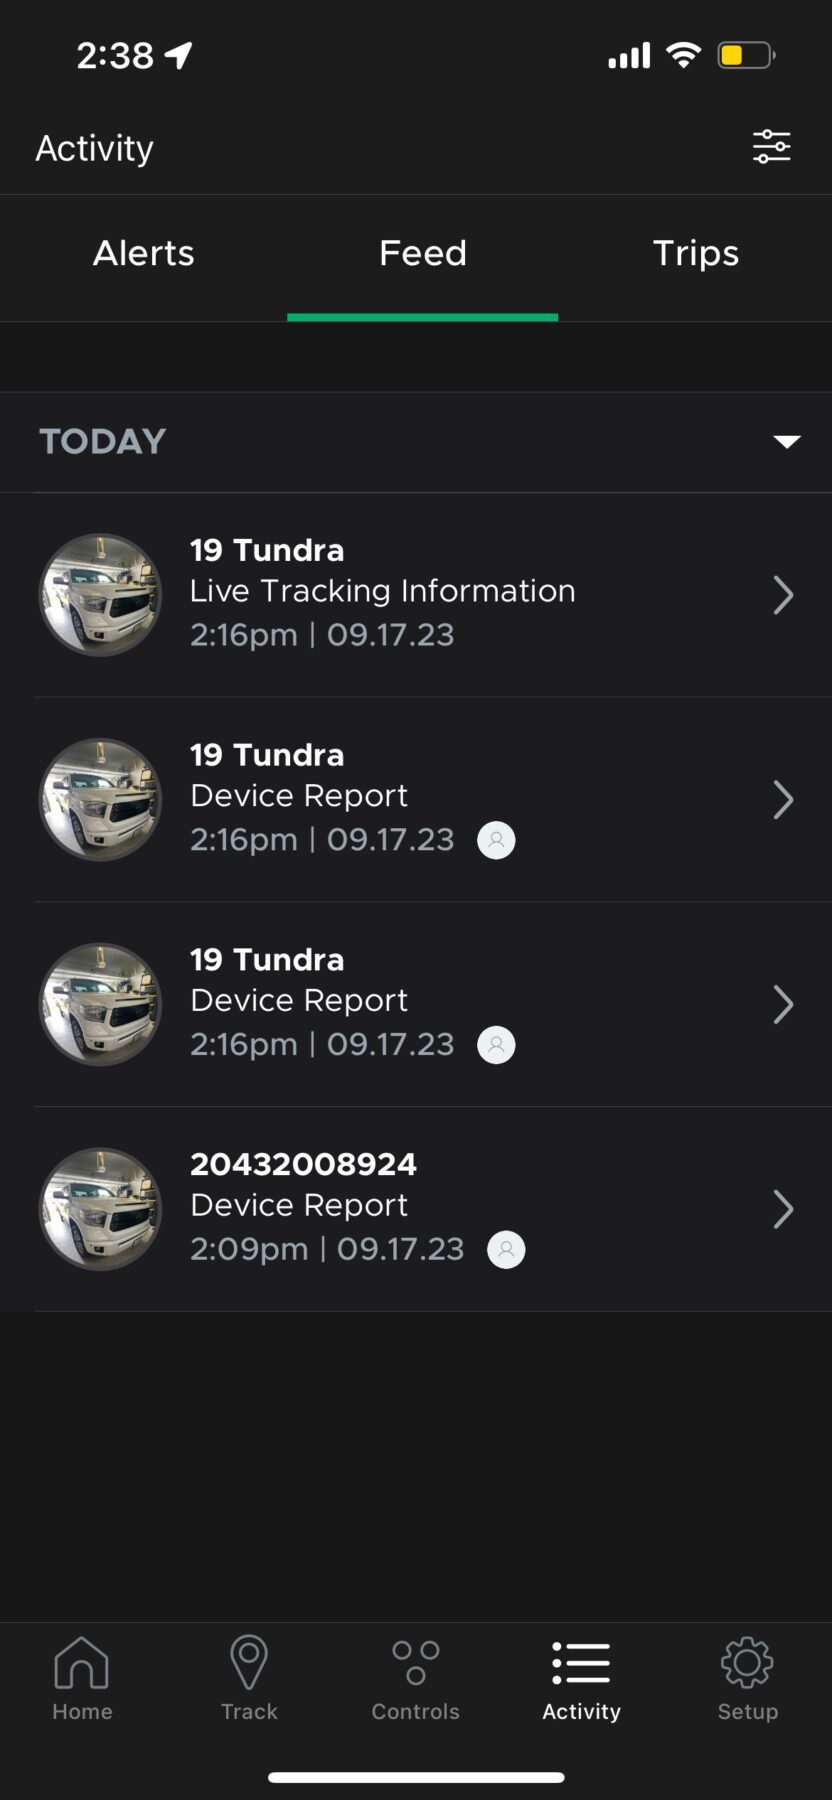 Drone Mobile App activity feed